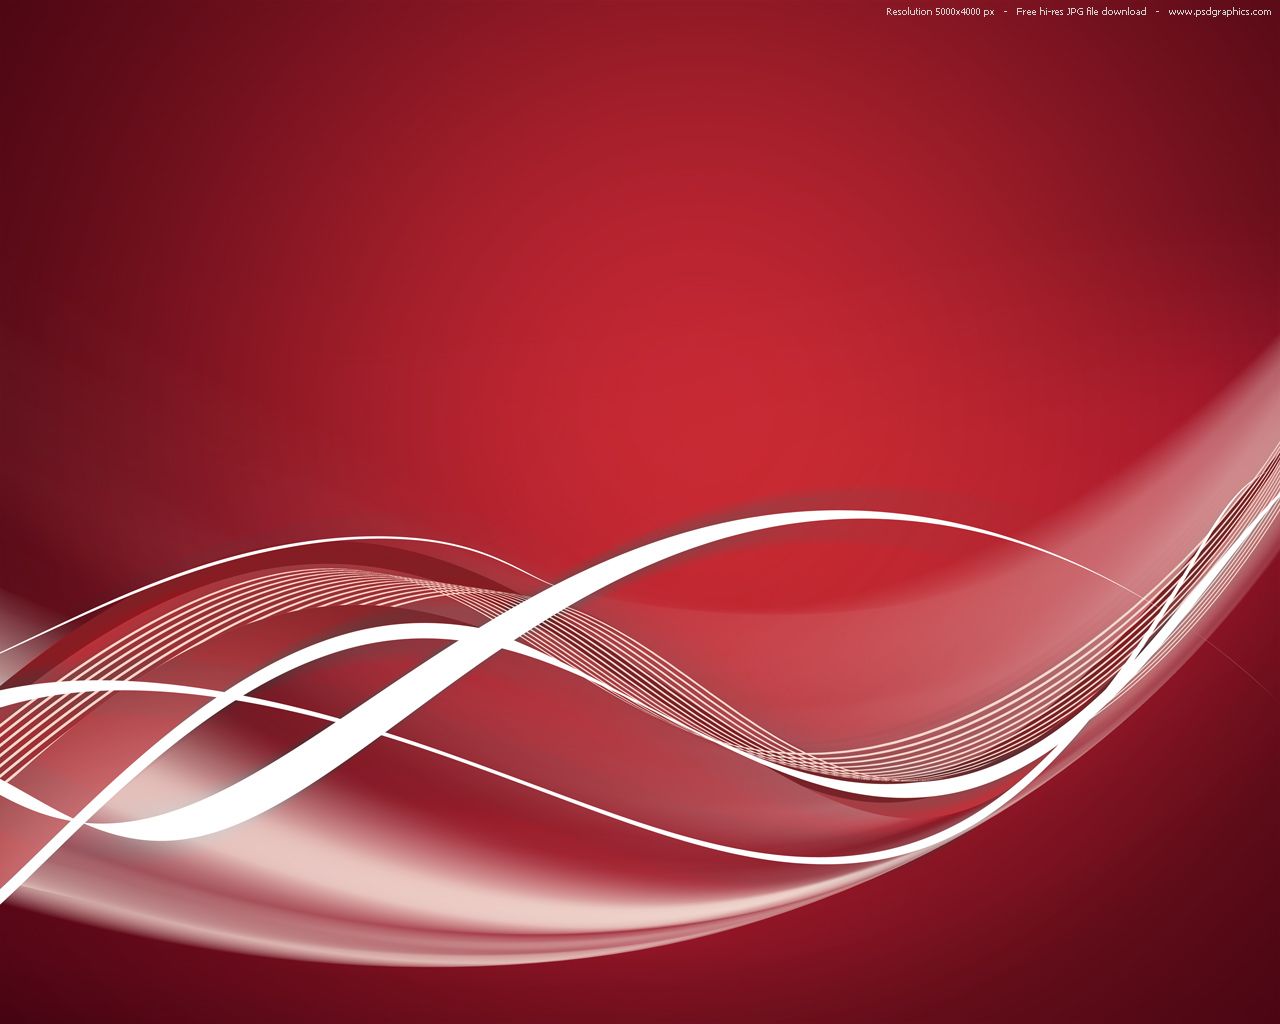 Gallery red and white wallpaper pink and white background black and white wallpaper